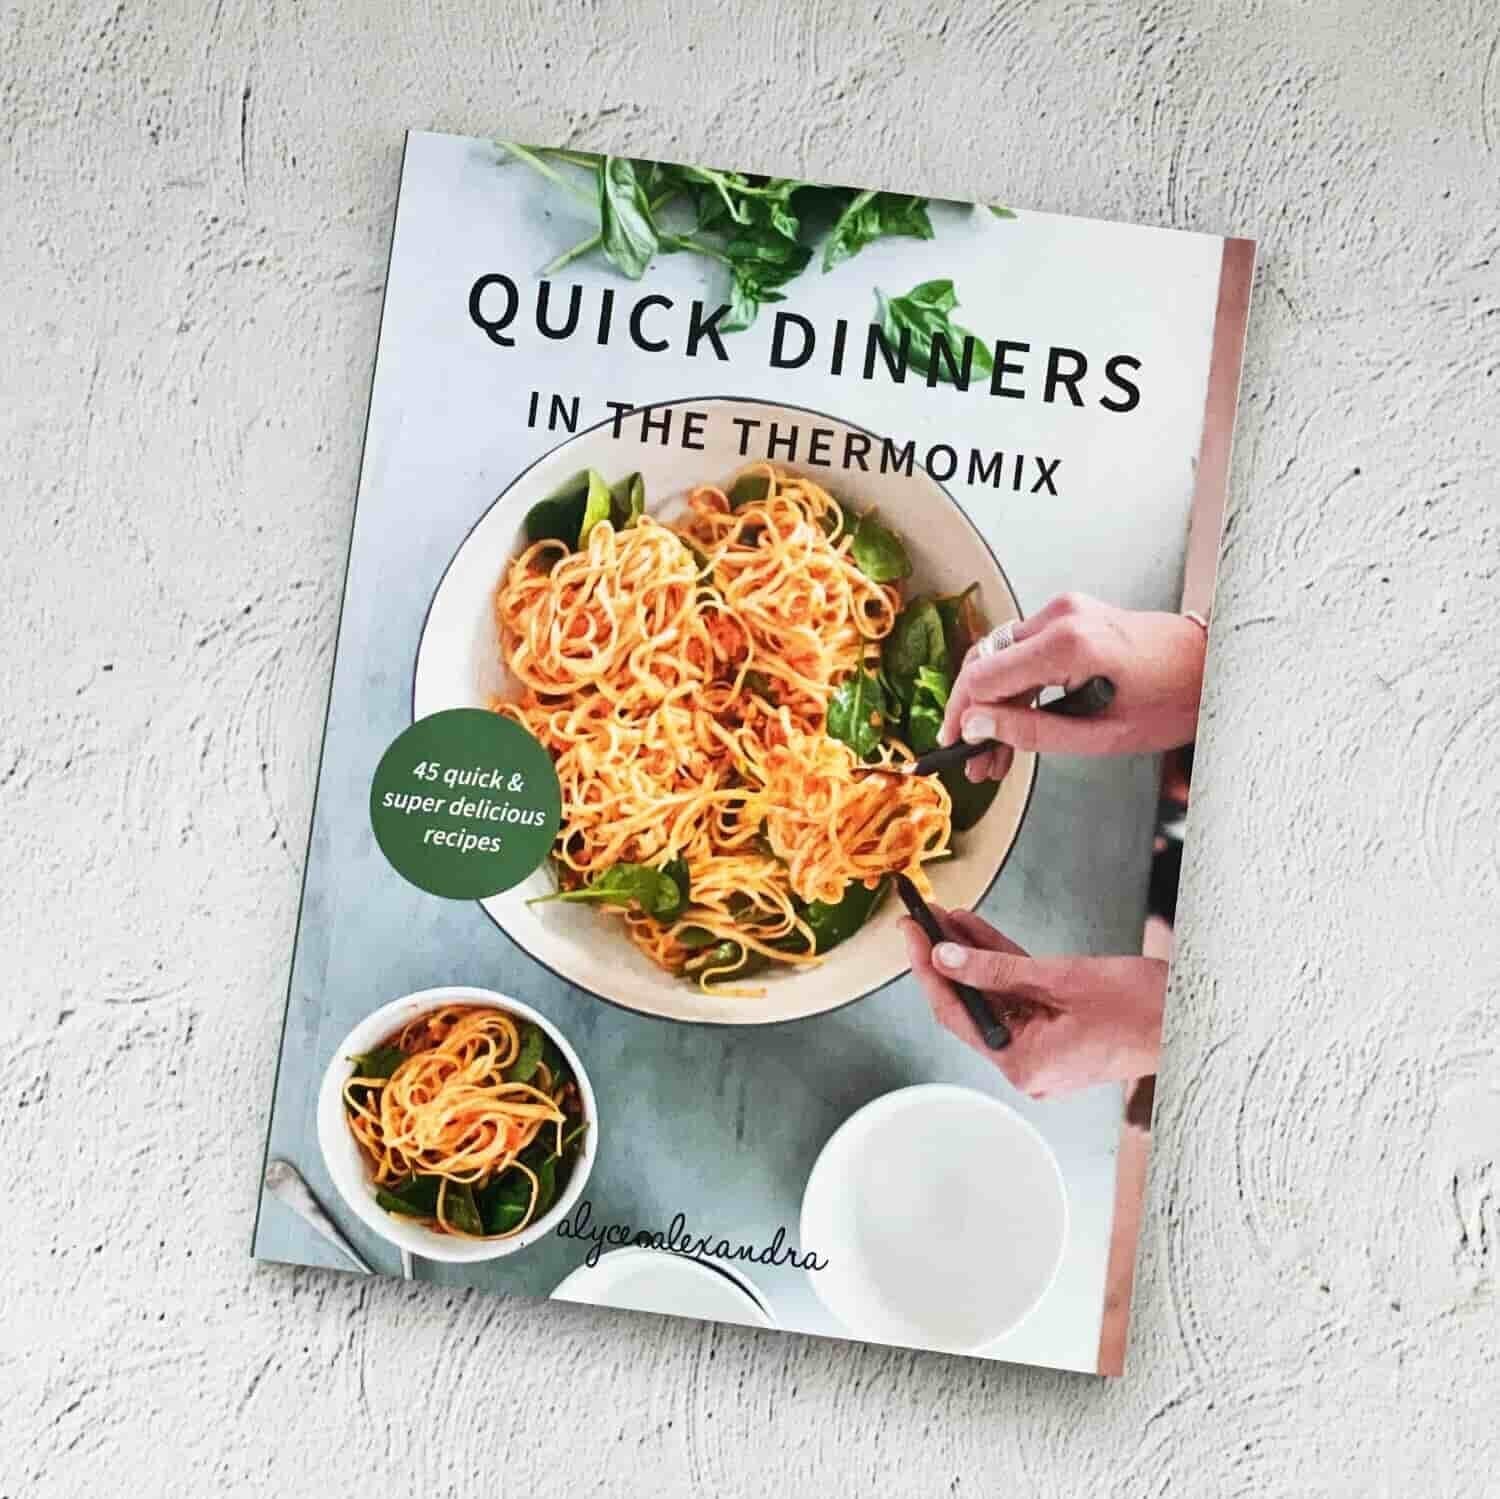 Alyce Alexandra's Quick Dinners in The Thermomix